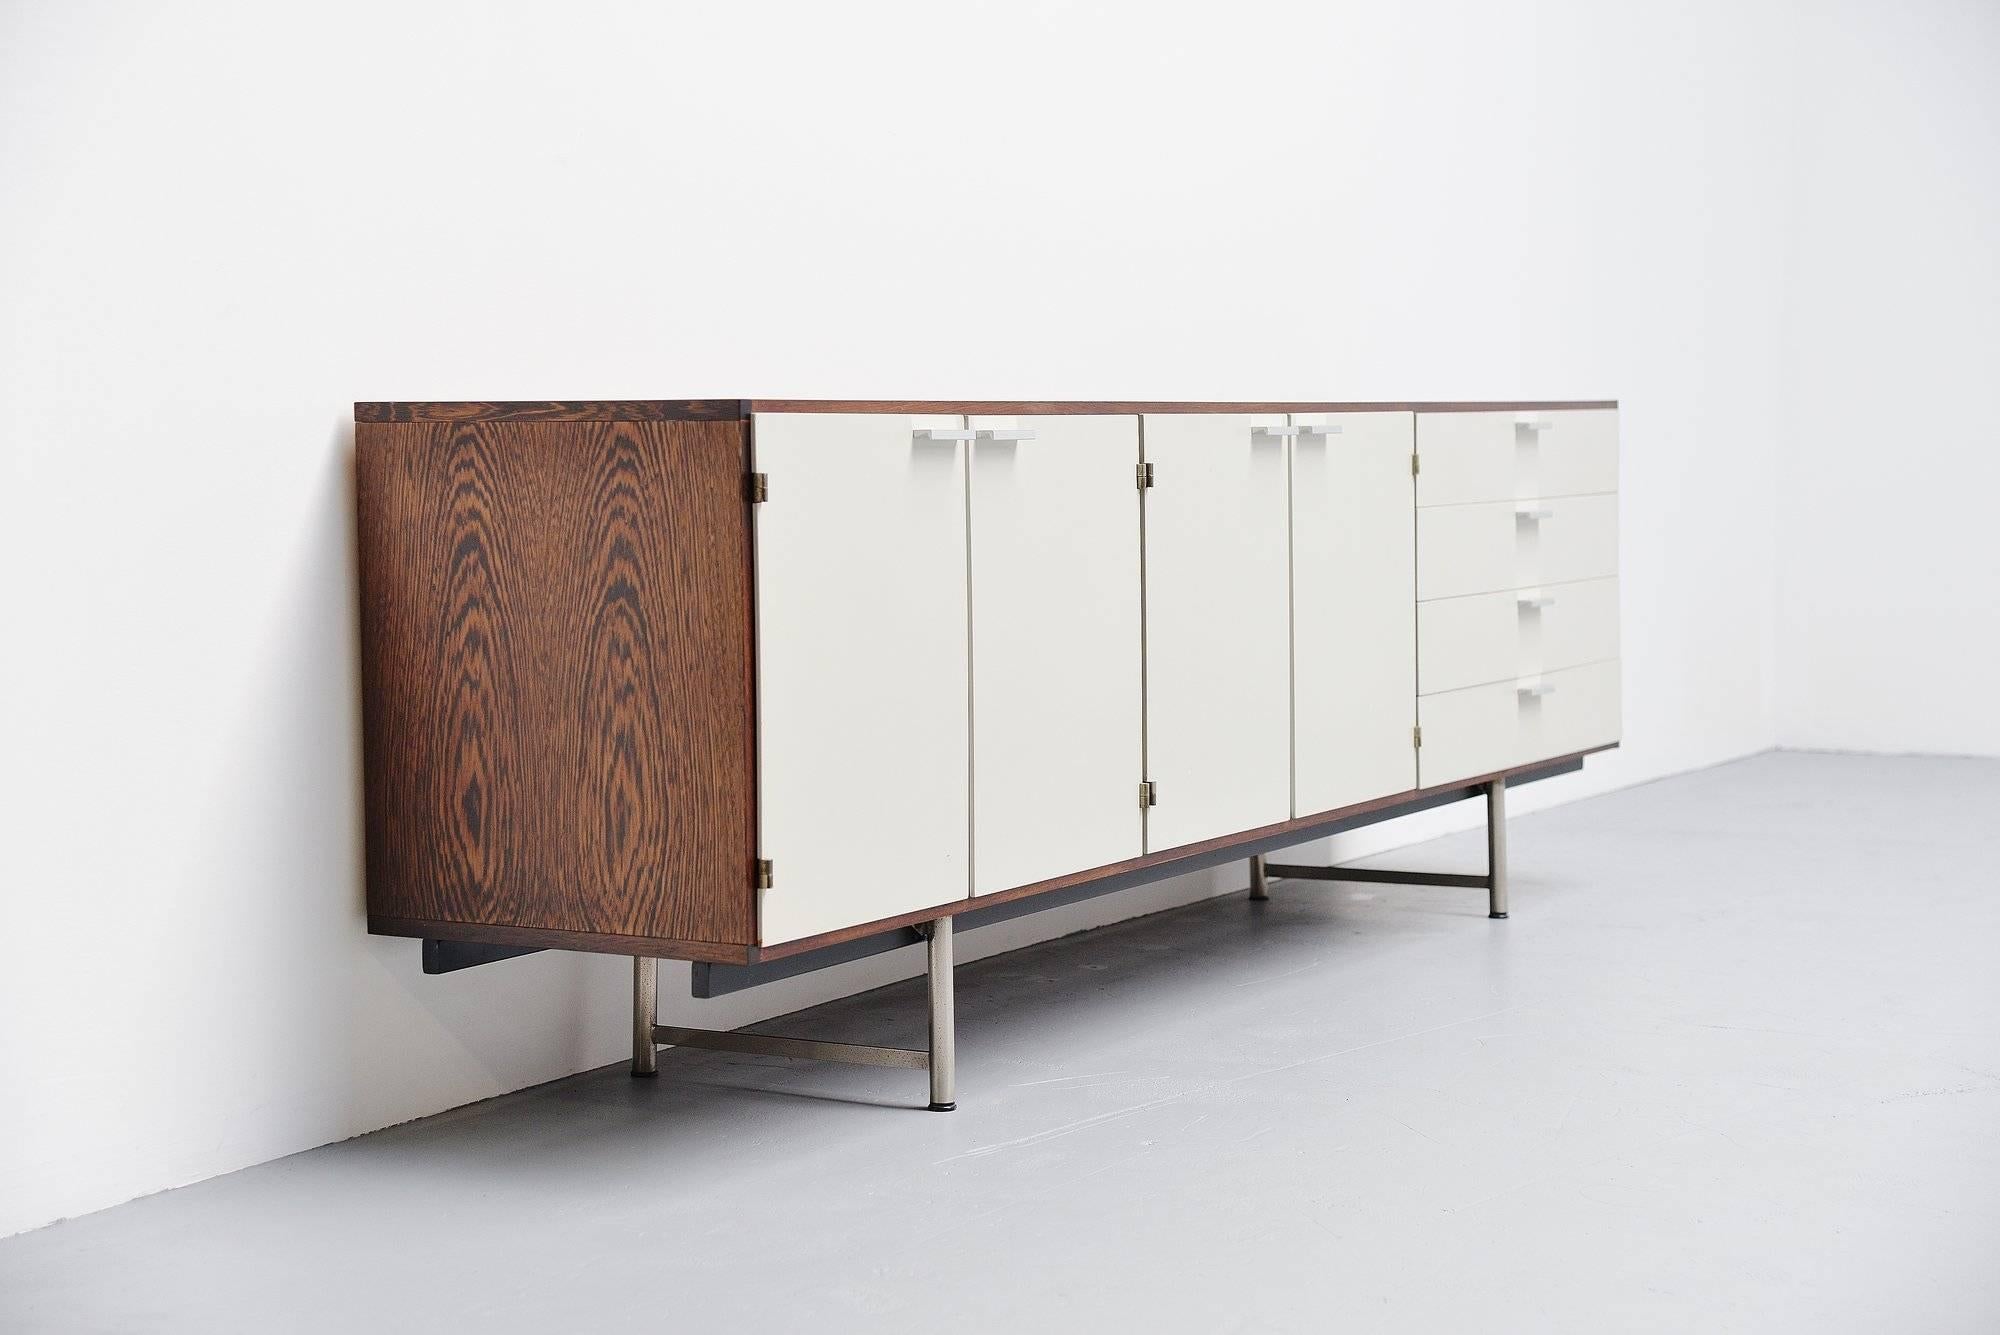 Very nice modernist sideboard designed by Cees Braakman, manufactured by Pastoe UMS Holland 1960. This is for a sideboard with a wenge cabinet and white painted doors. The sideboard has aluminum grips and matt chrome plated legs. It has 4 folding